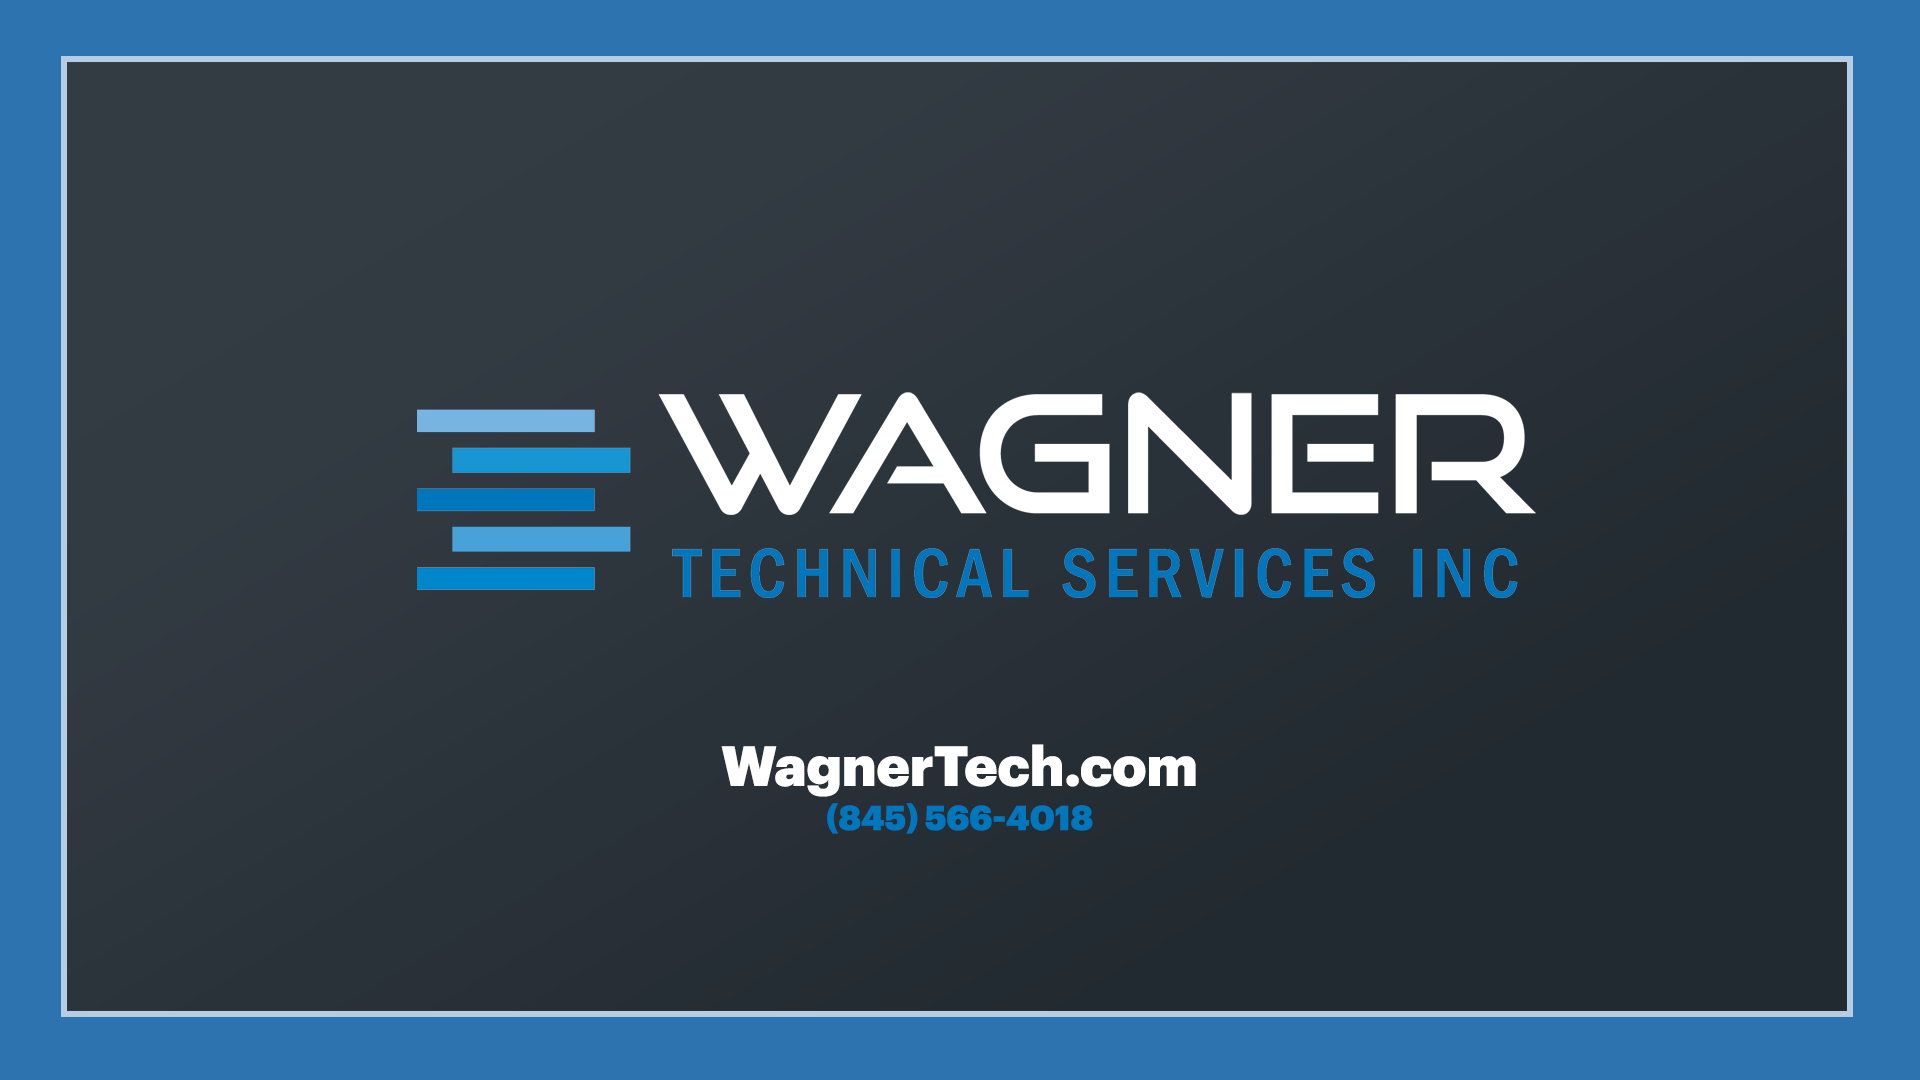 Wagner Technical Services video overlay with website